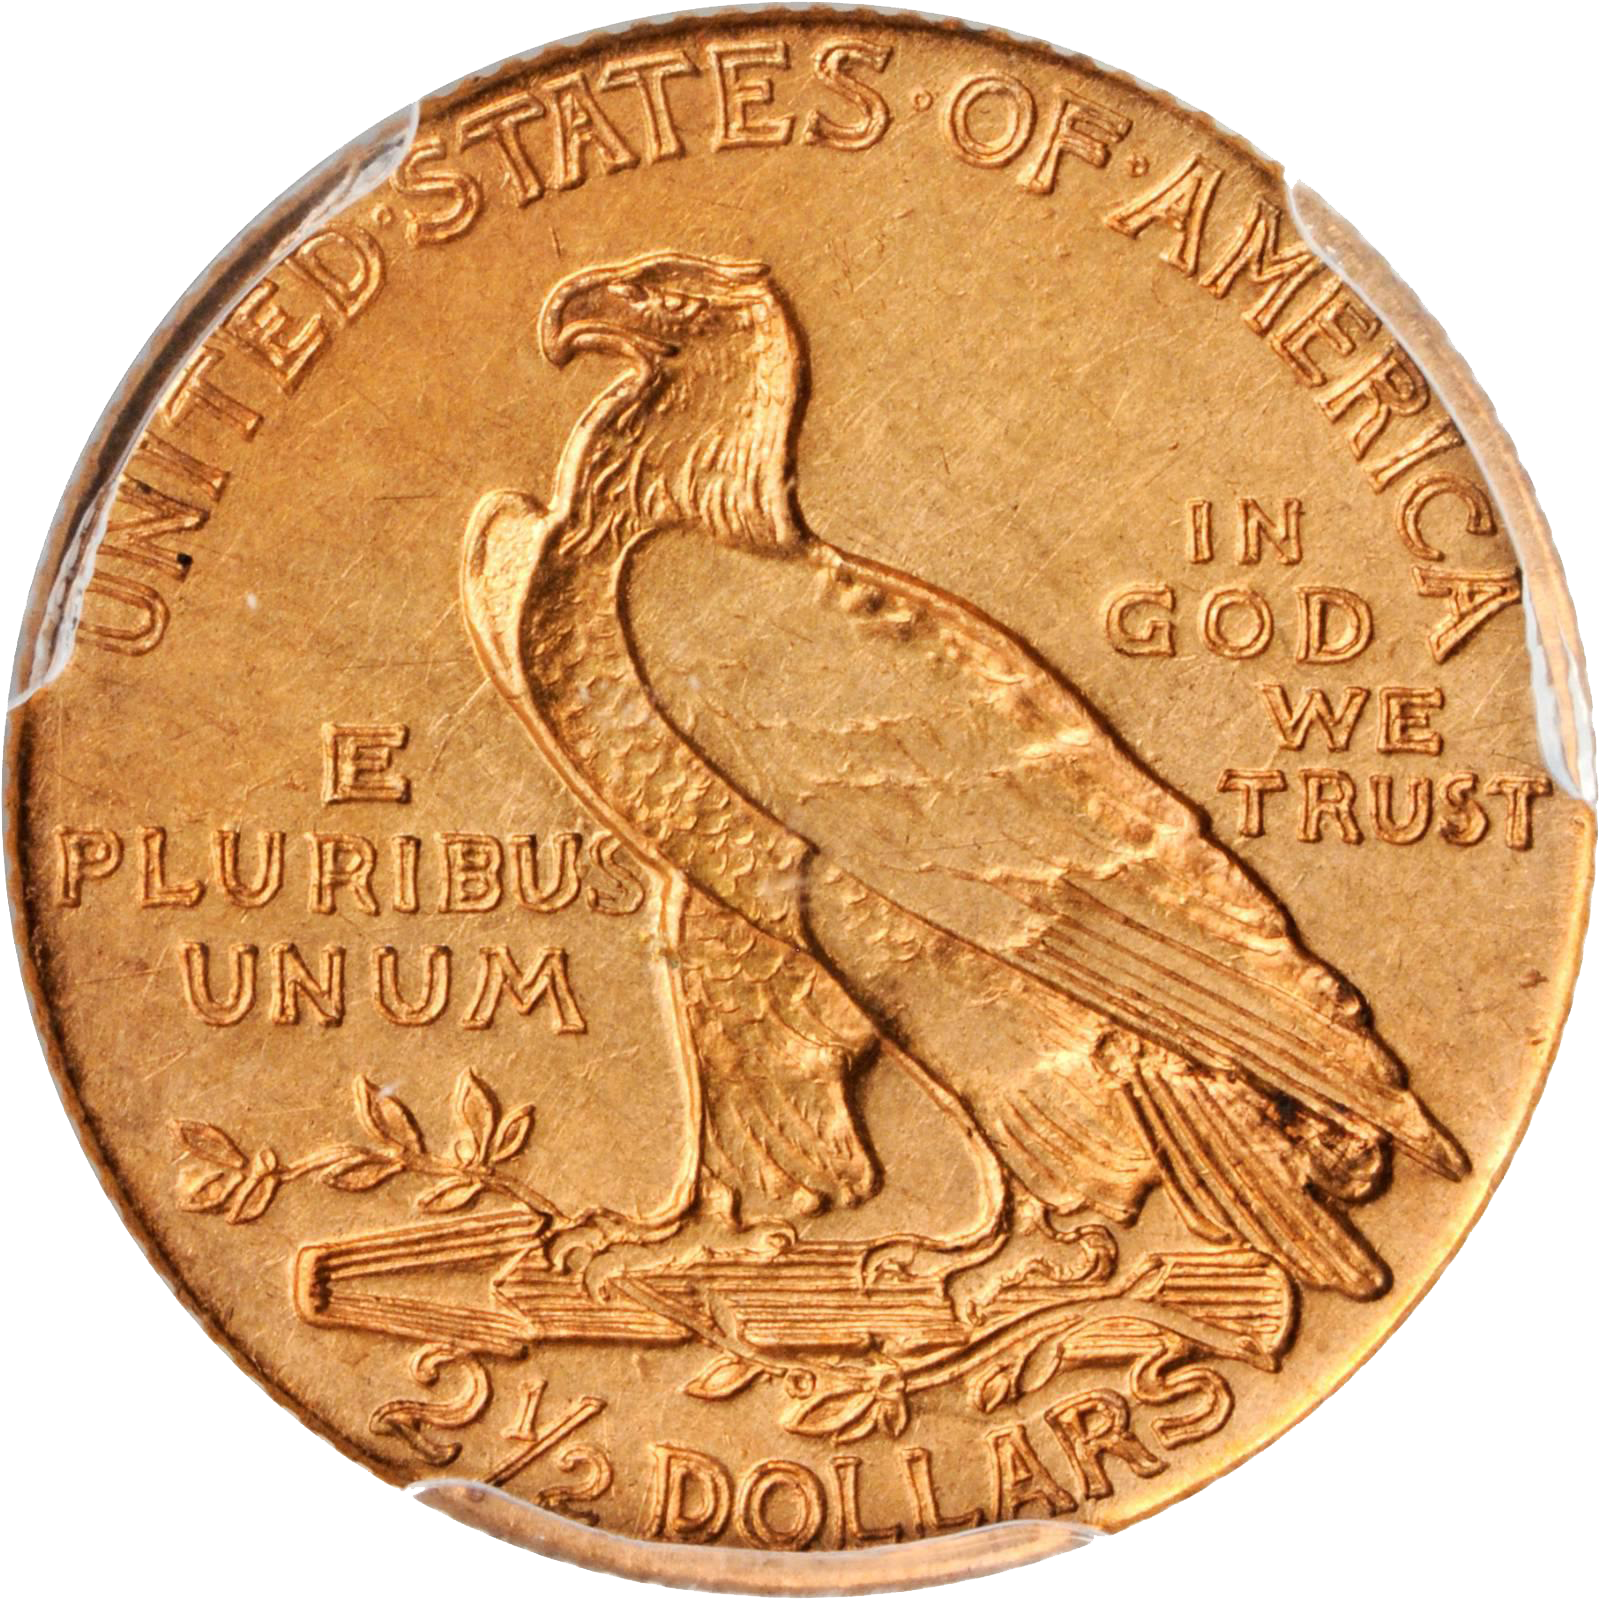 At Auction: 1910 2 1/2 Dollar Gold Indian Coin